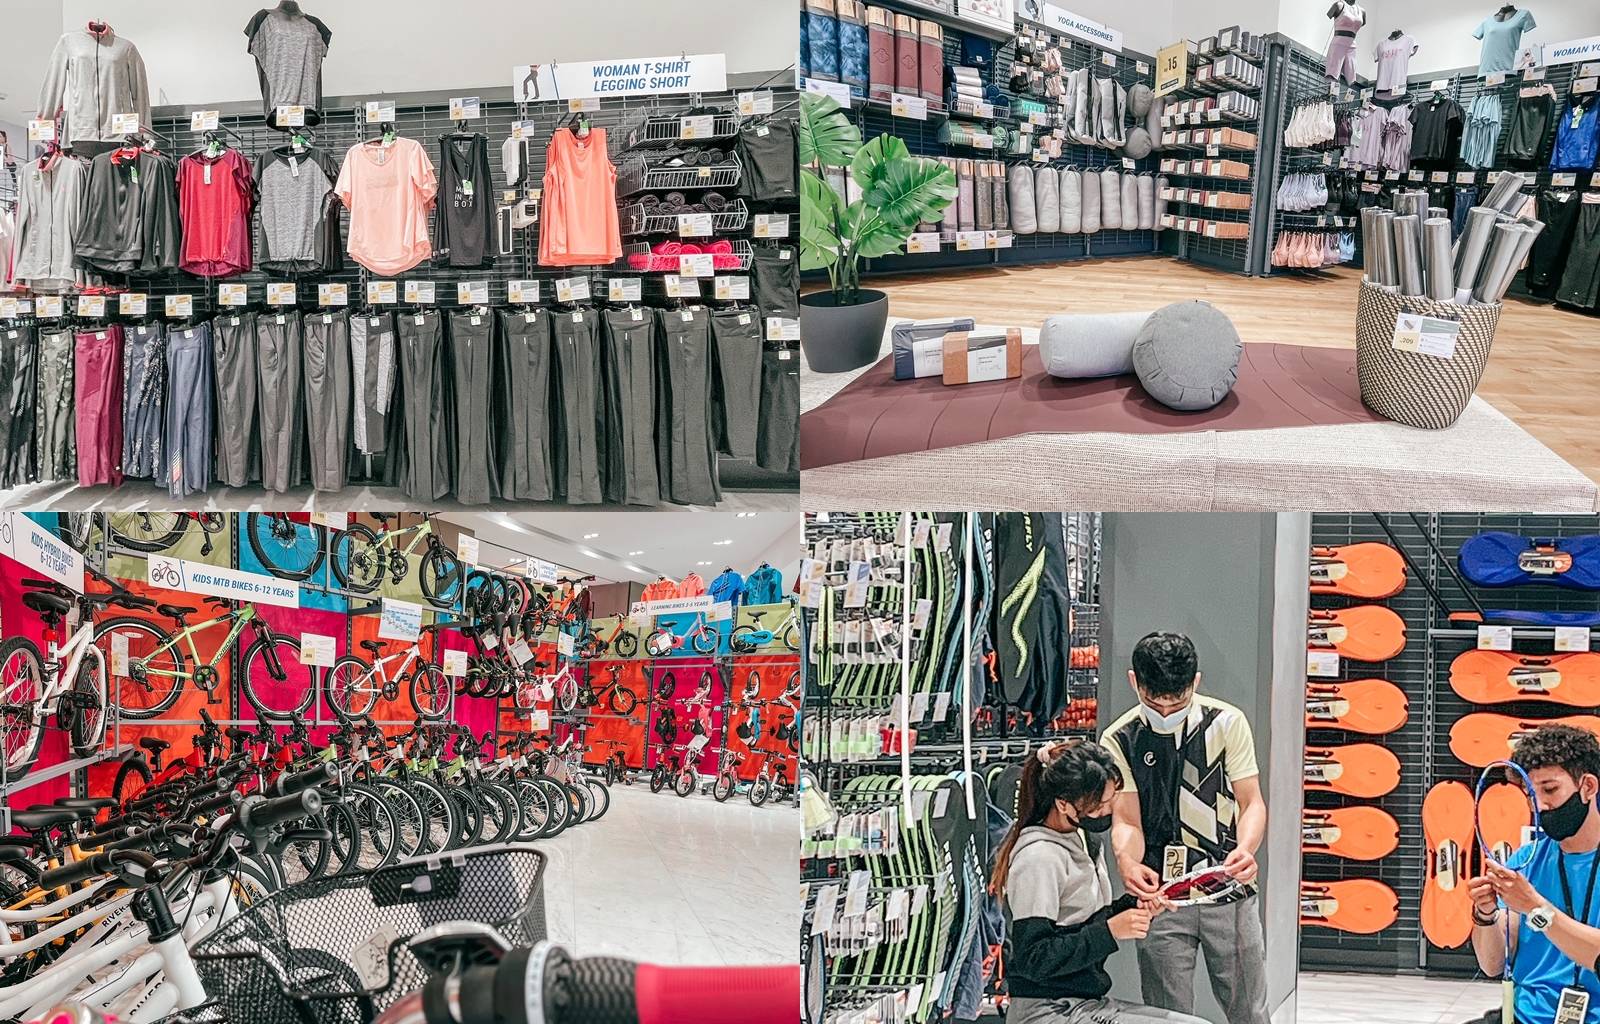 Decathlon products proudly made in Malaysia